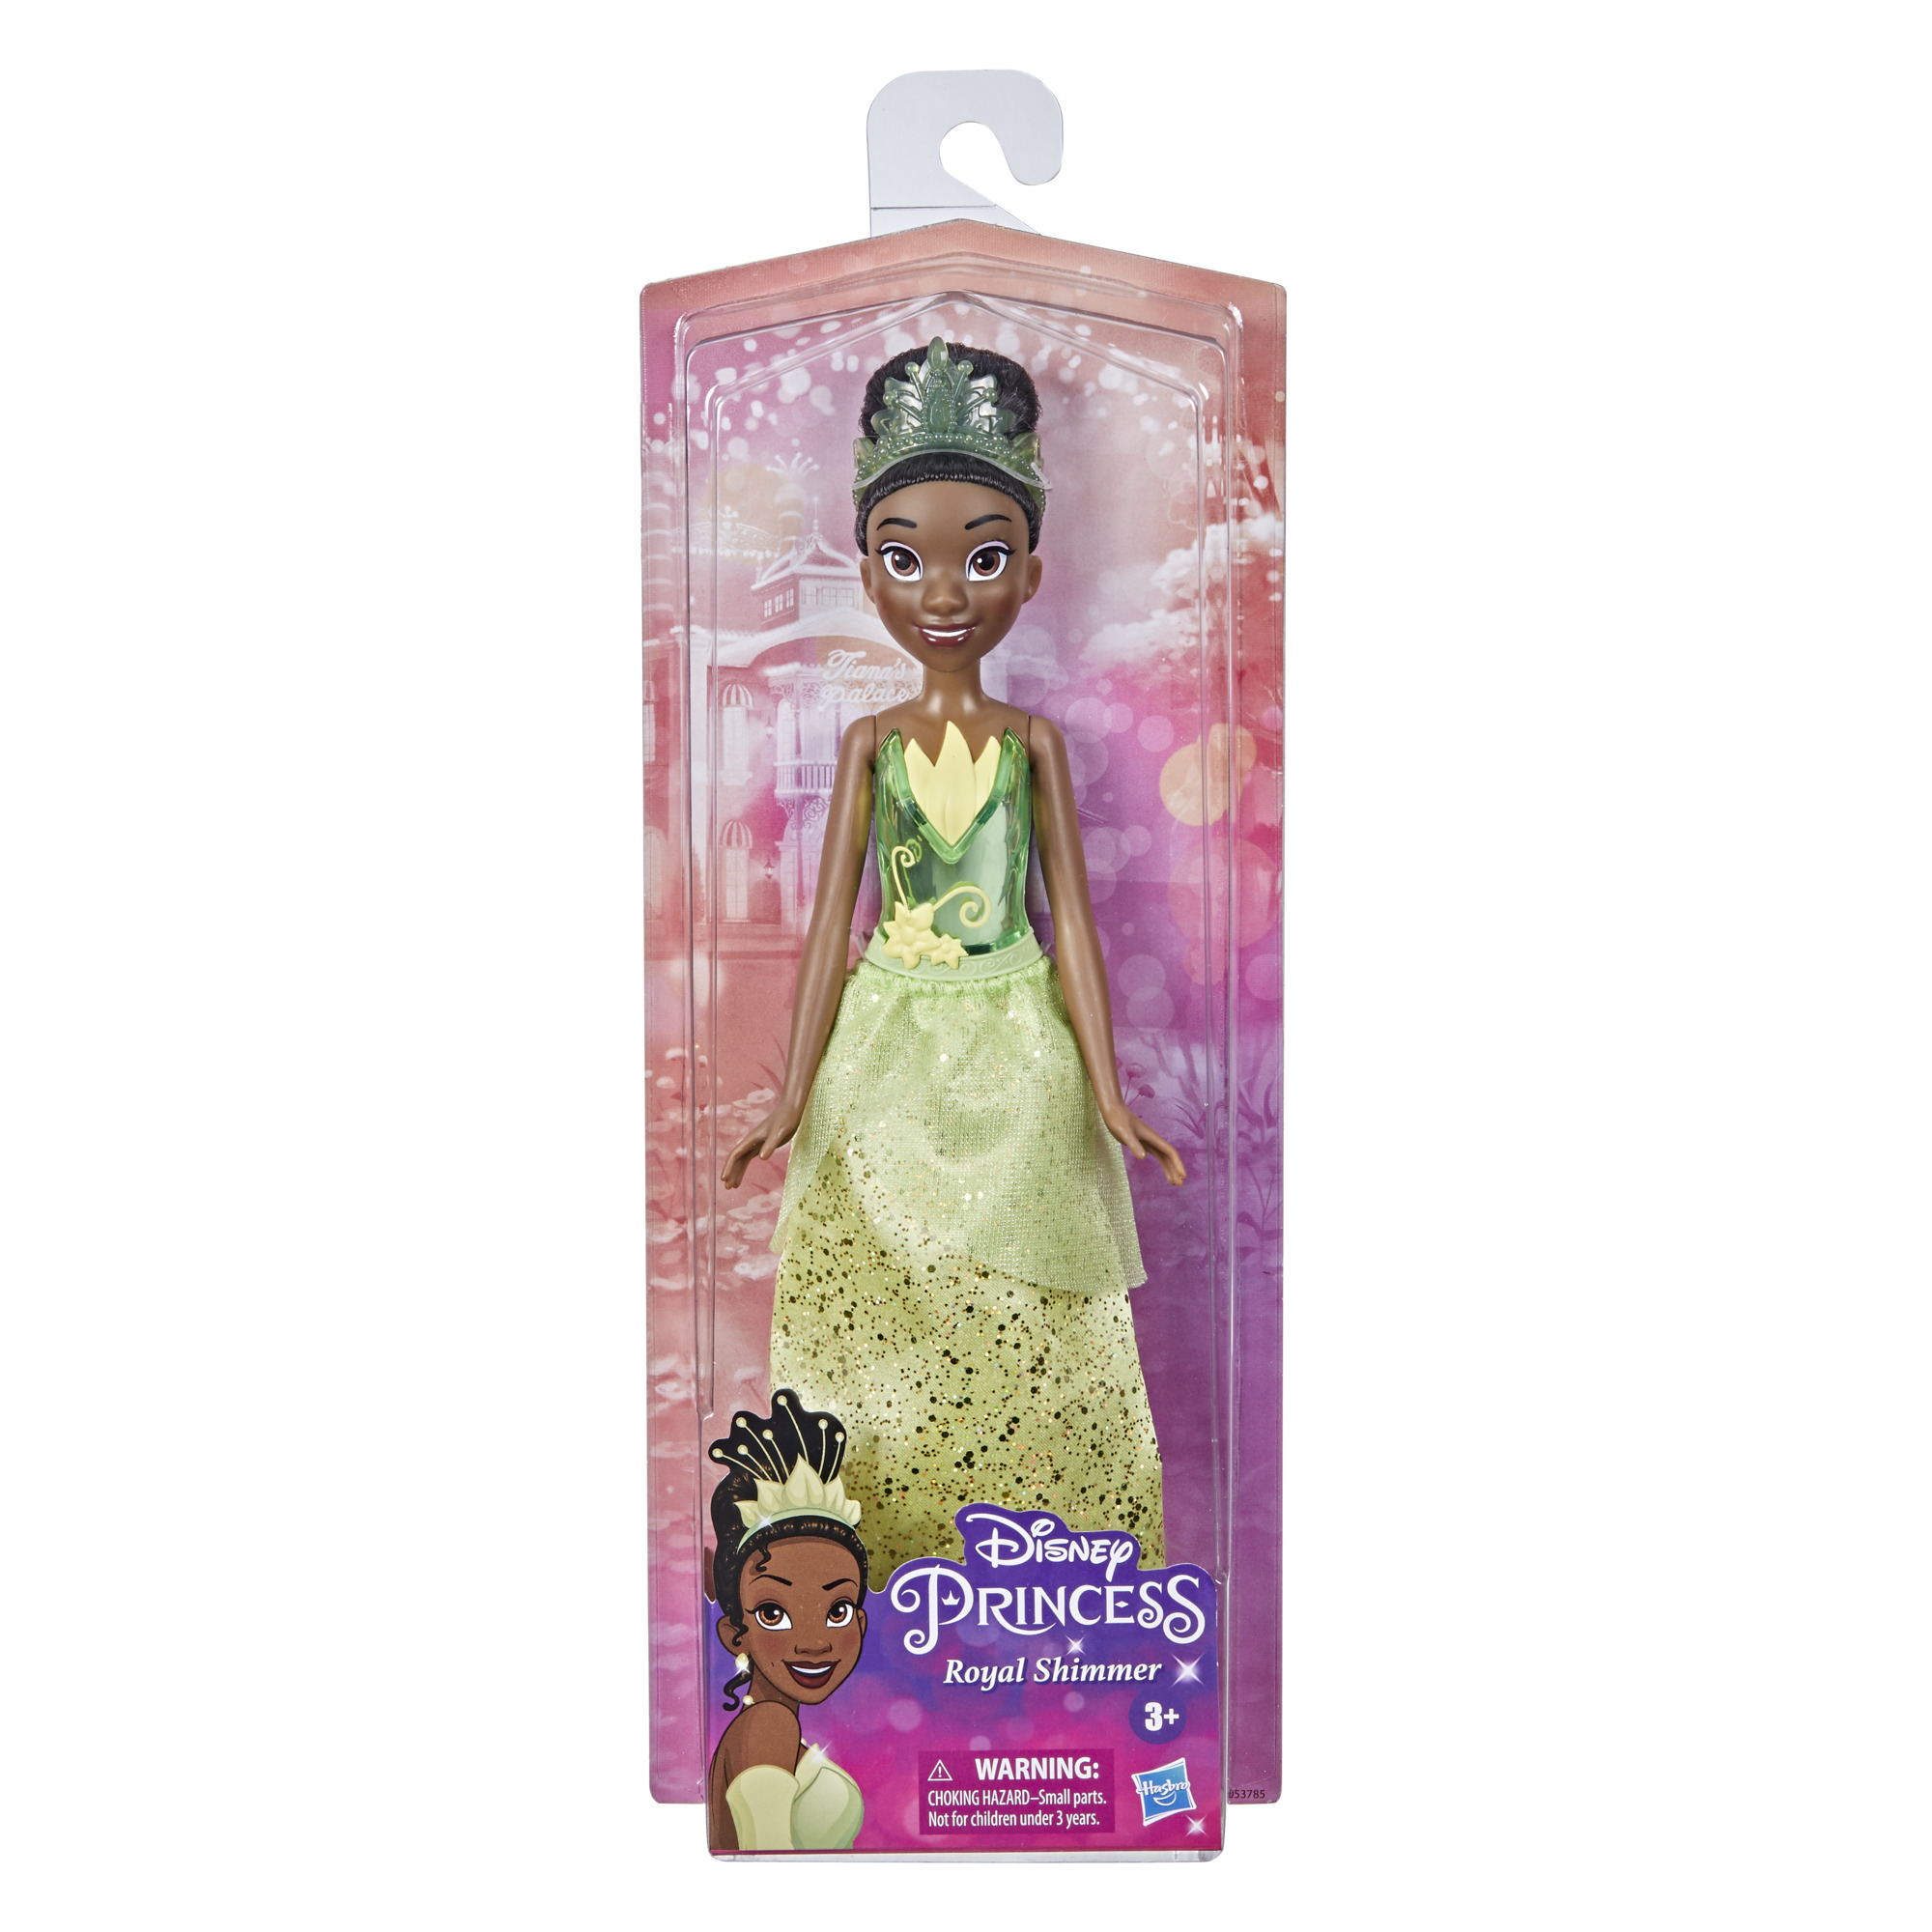 Disney Princess Royal Shimmer Tiana Fashion Doll, Accessories Included - image 3 of 9